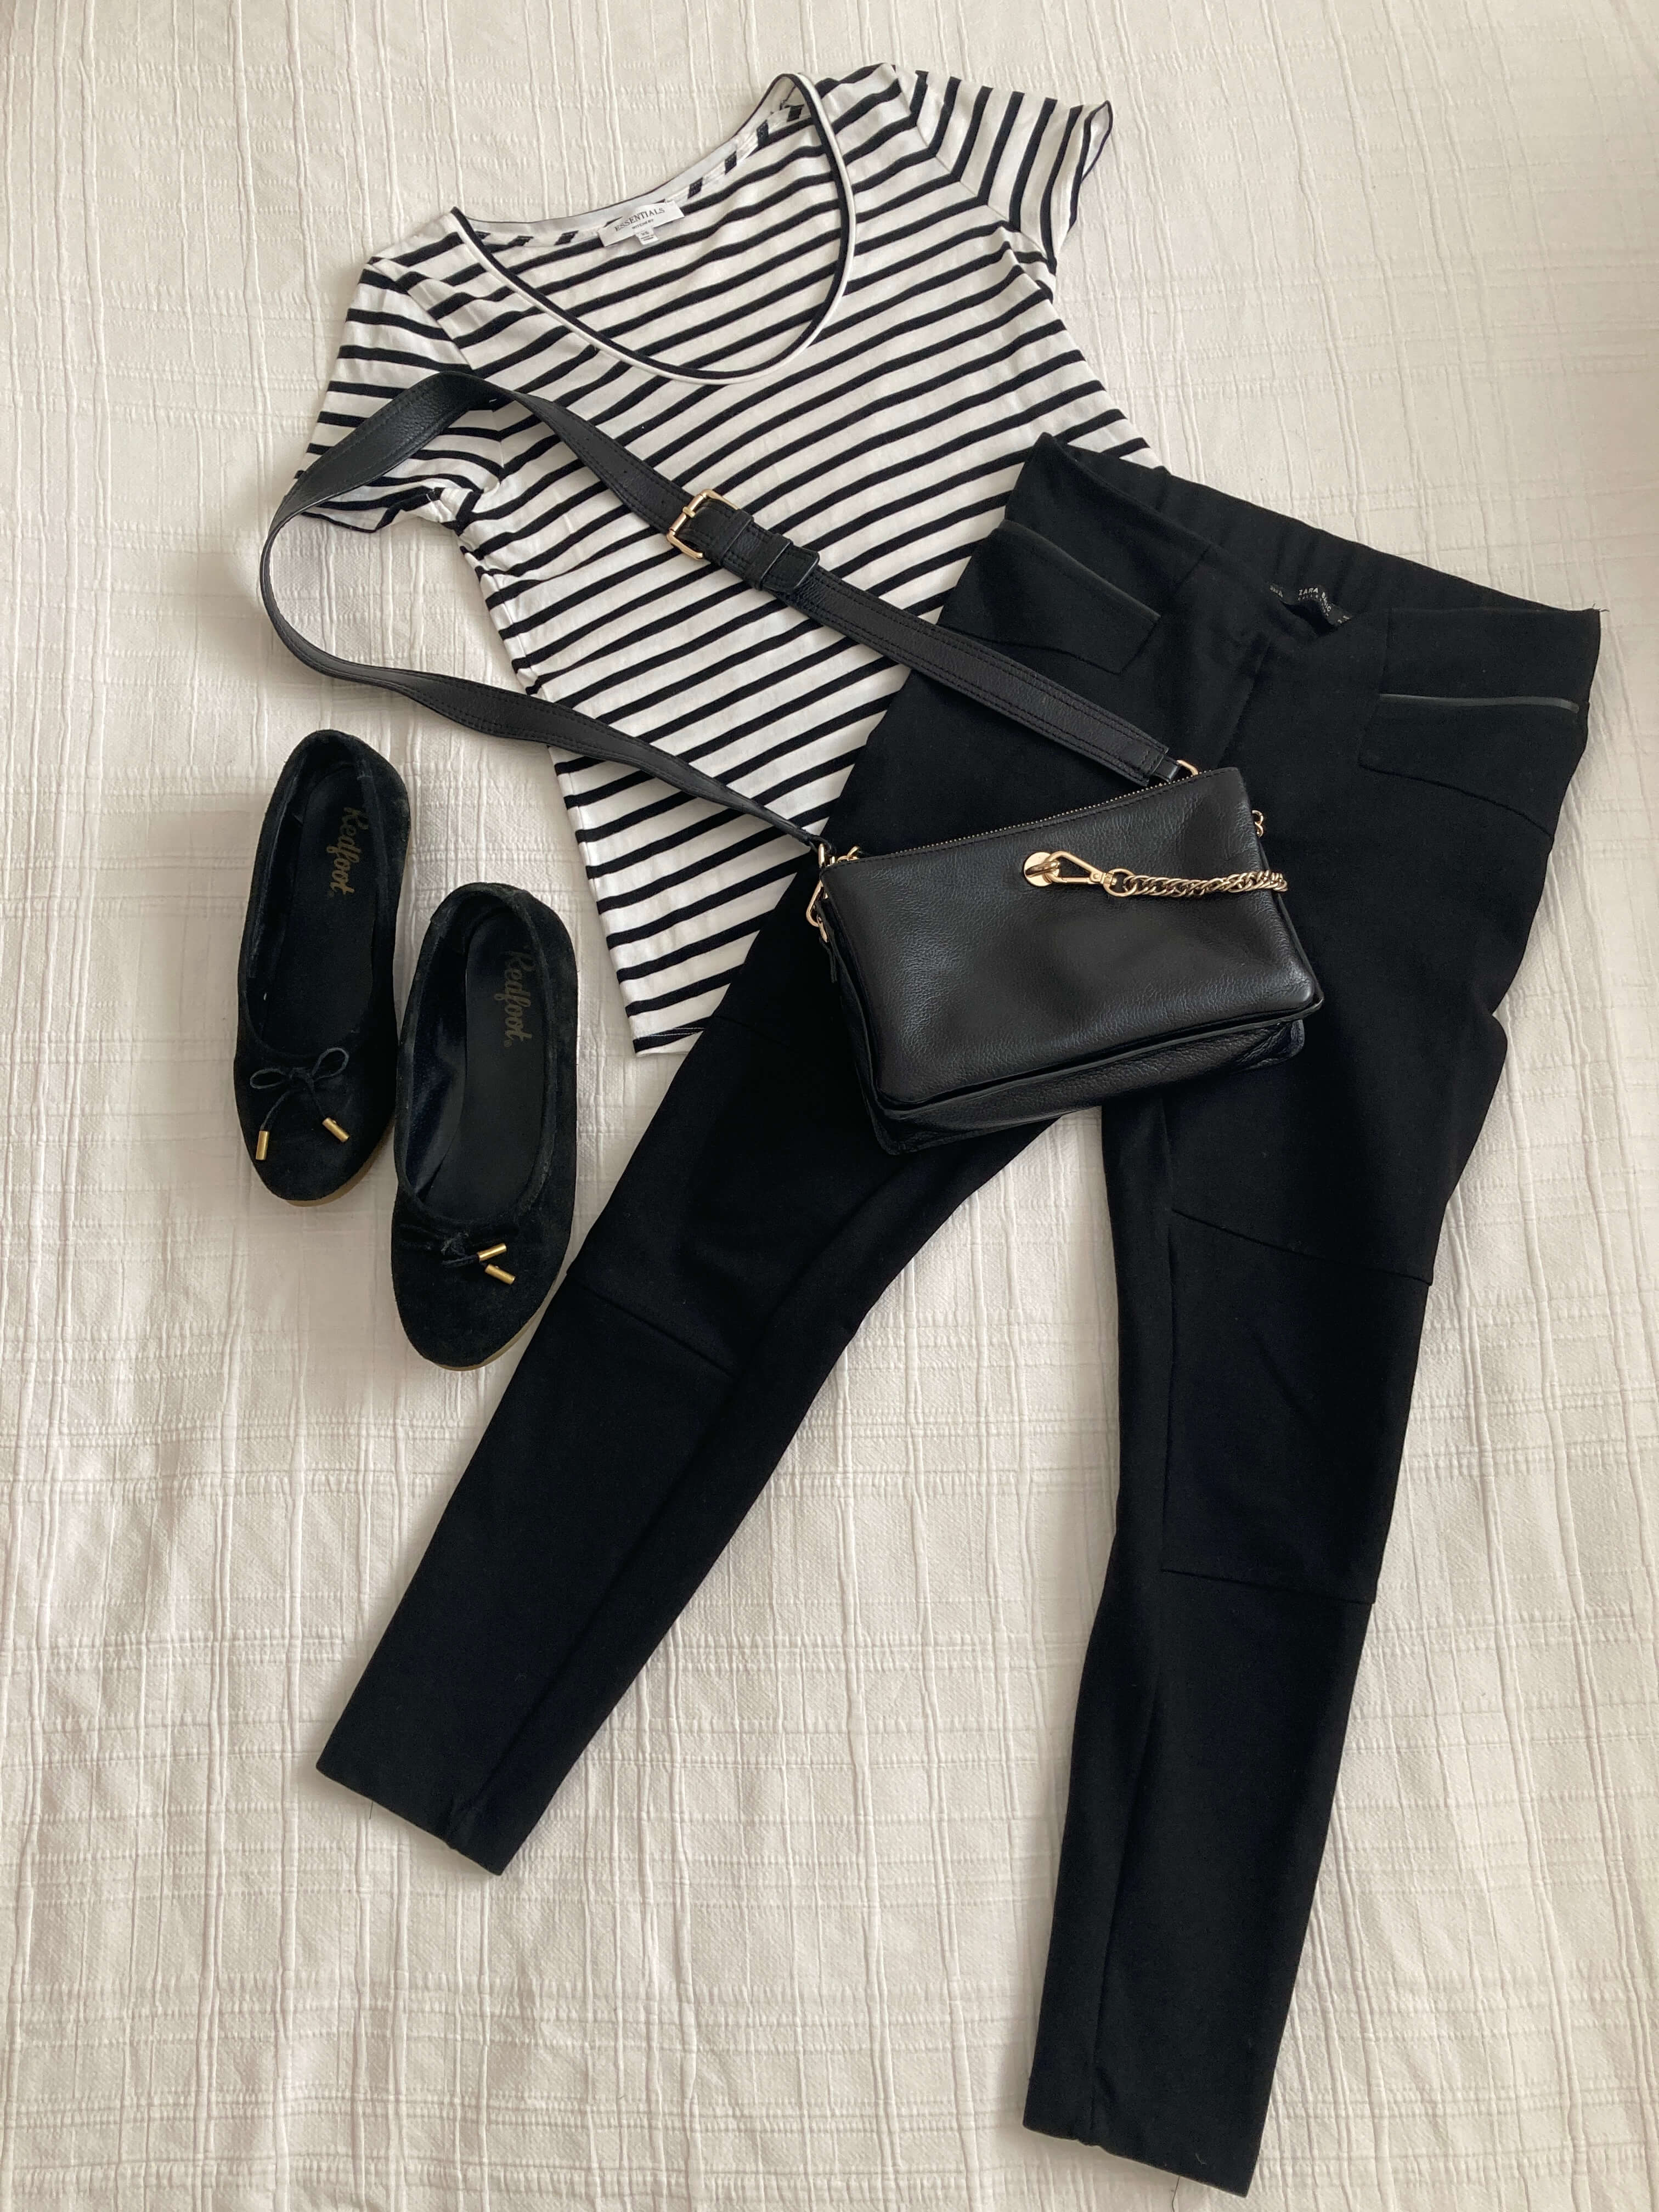 black and white outfit with leggings